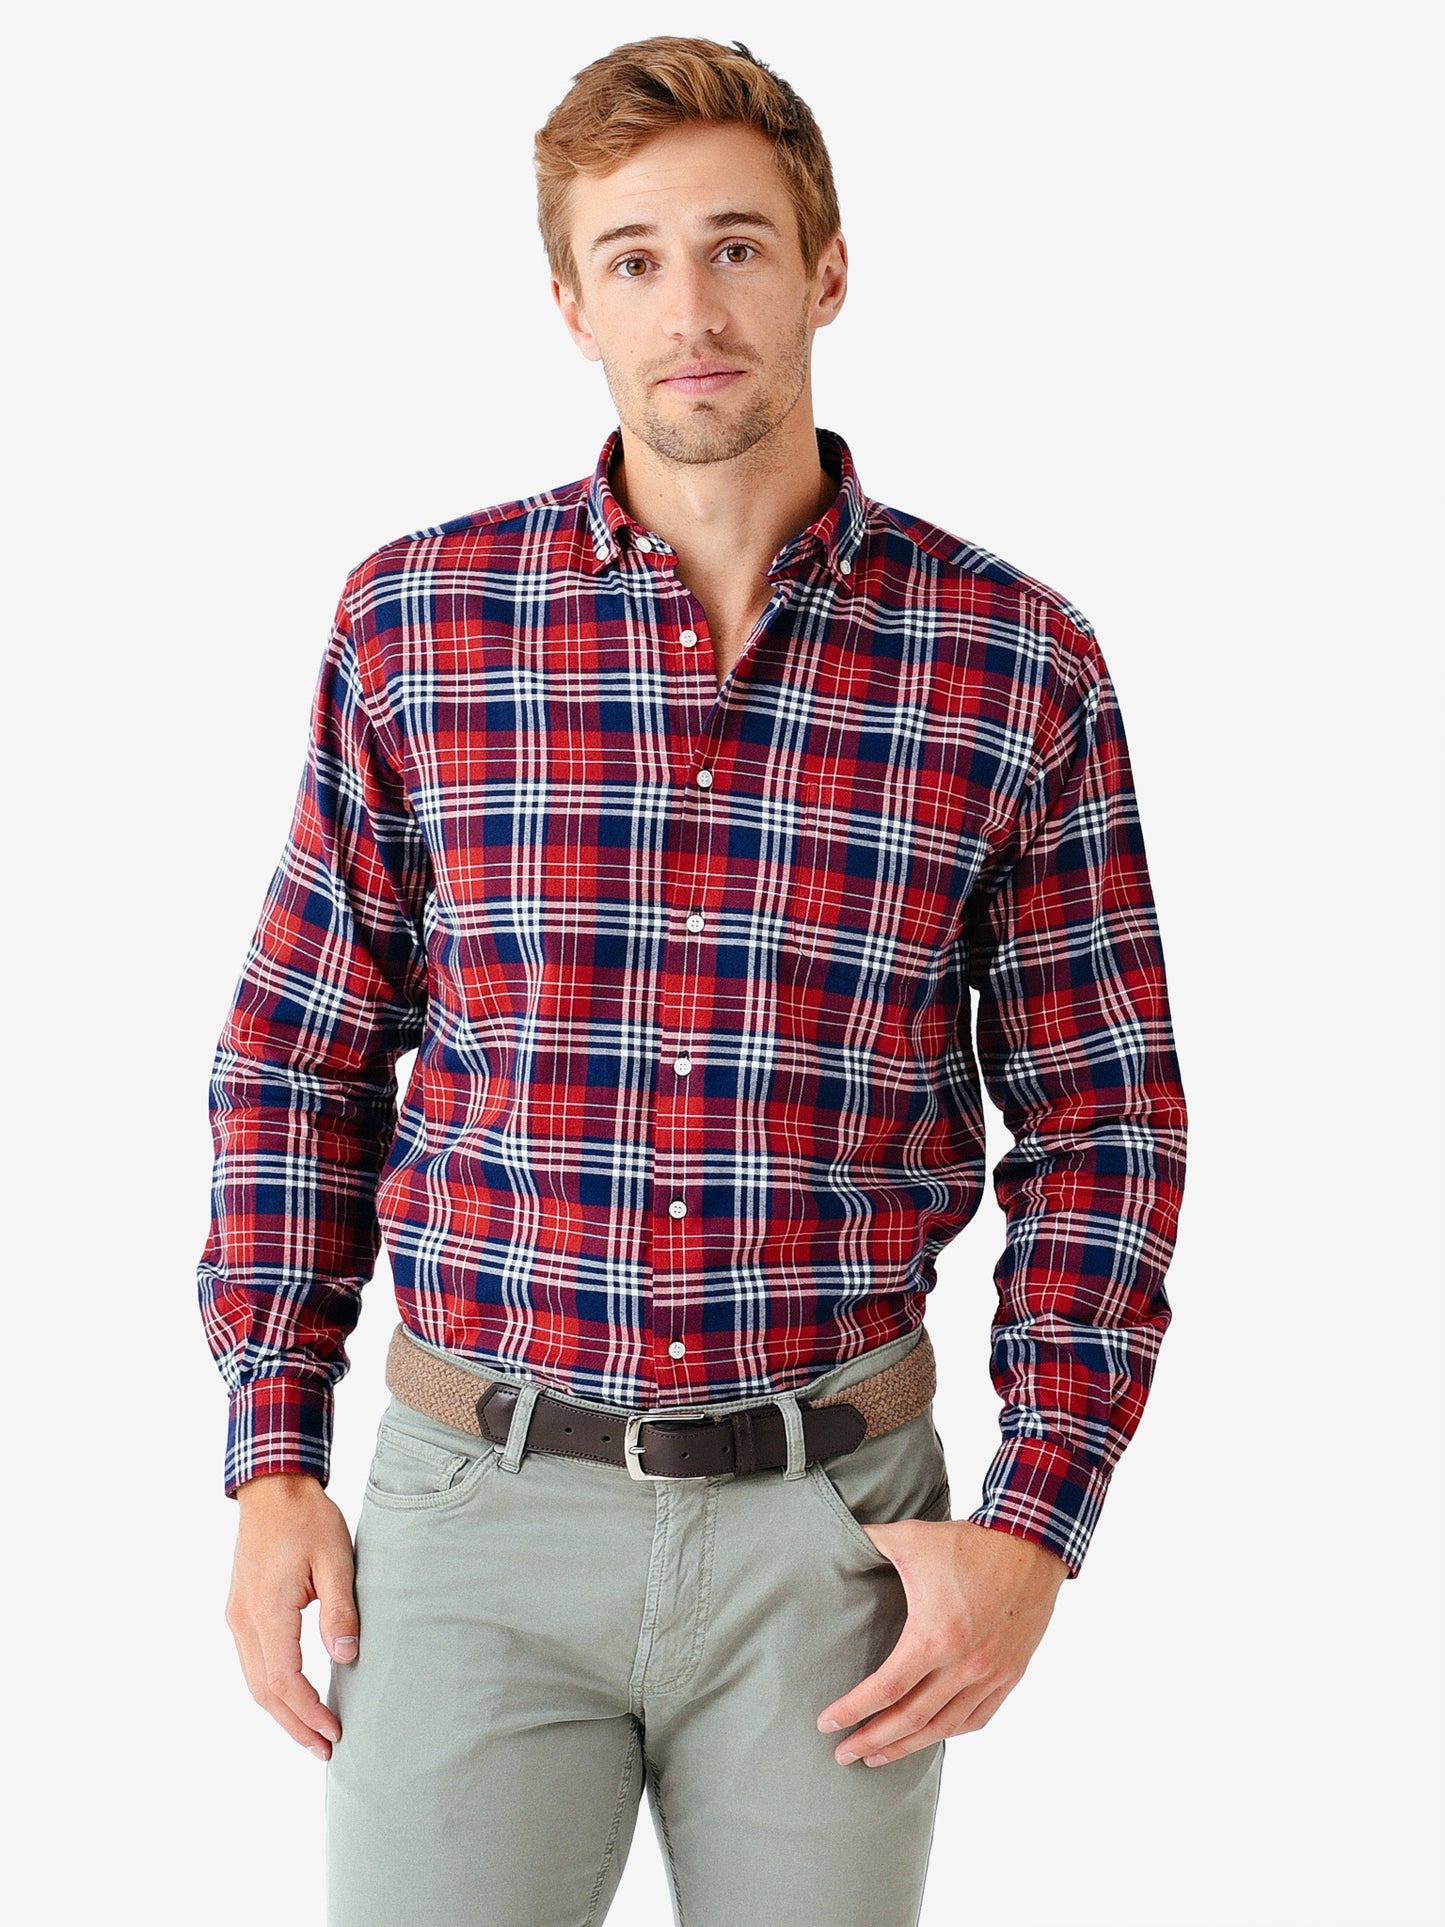 Miller Westby Men's Taylor Button-Down Shirt